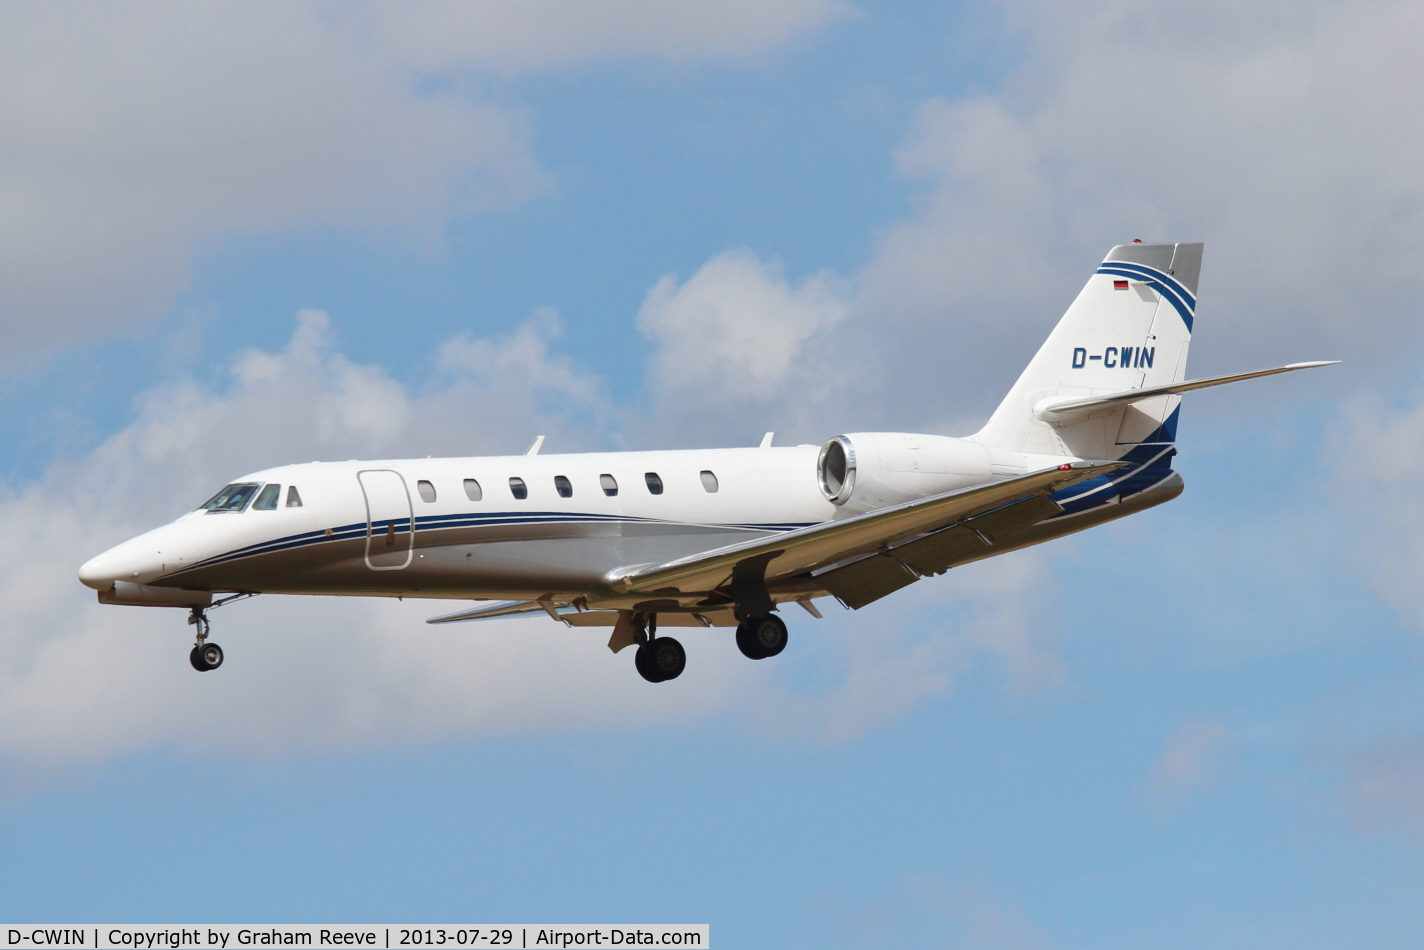 D-CWIN, 2011 Cessna 680 Citation Sovereign C/N 680-0305, On finals to land on runway 27.